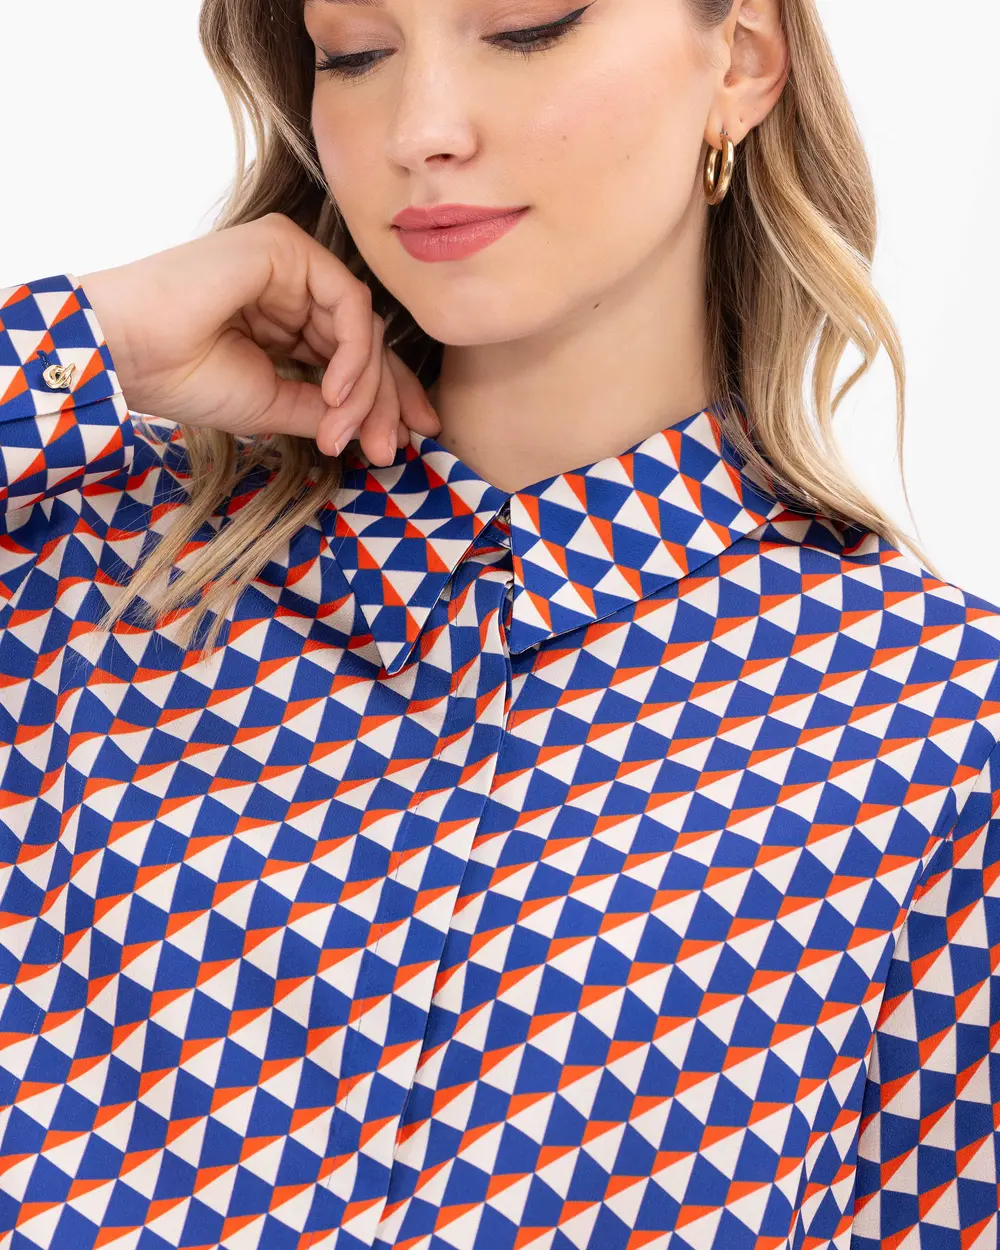 Geometric Patterned Buttoned Casual Shirt